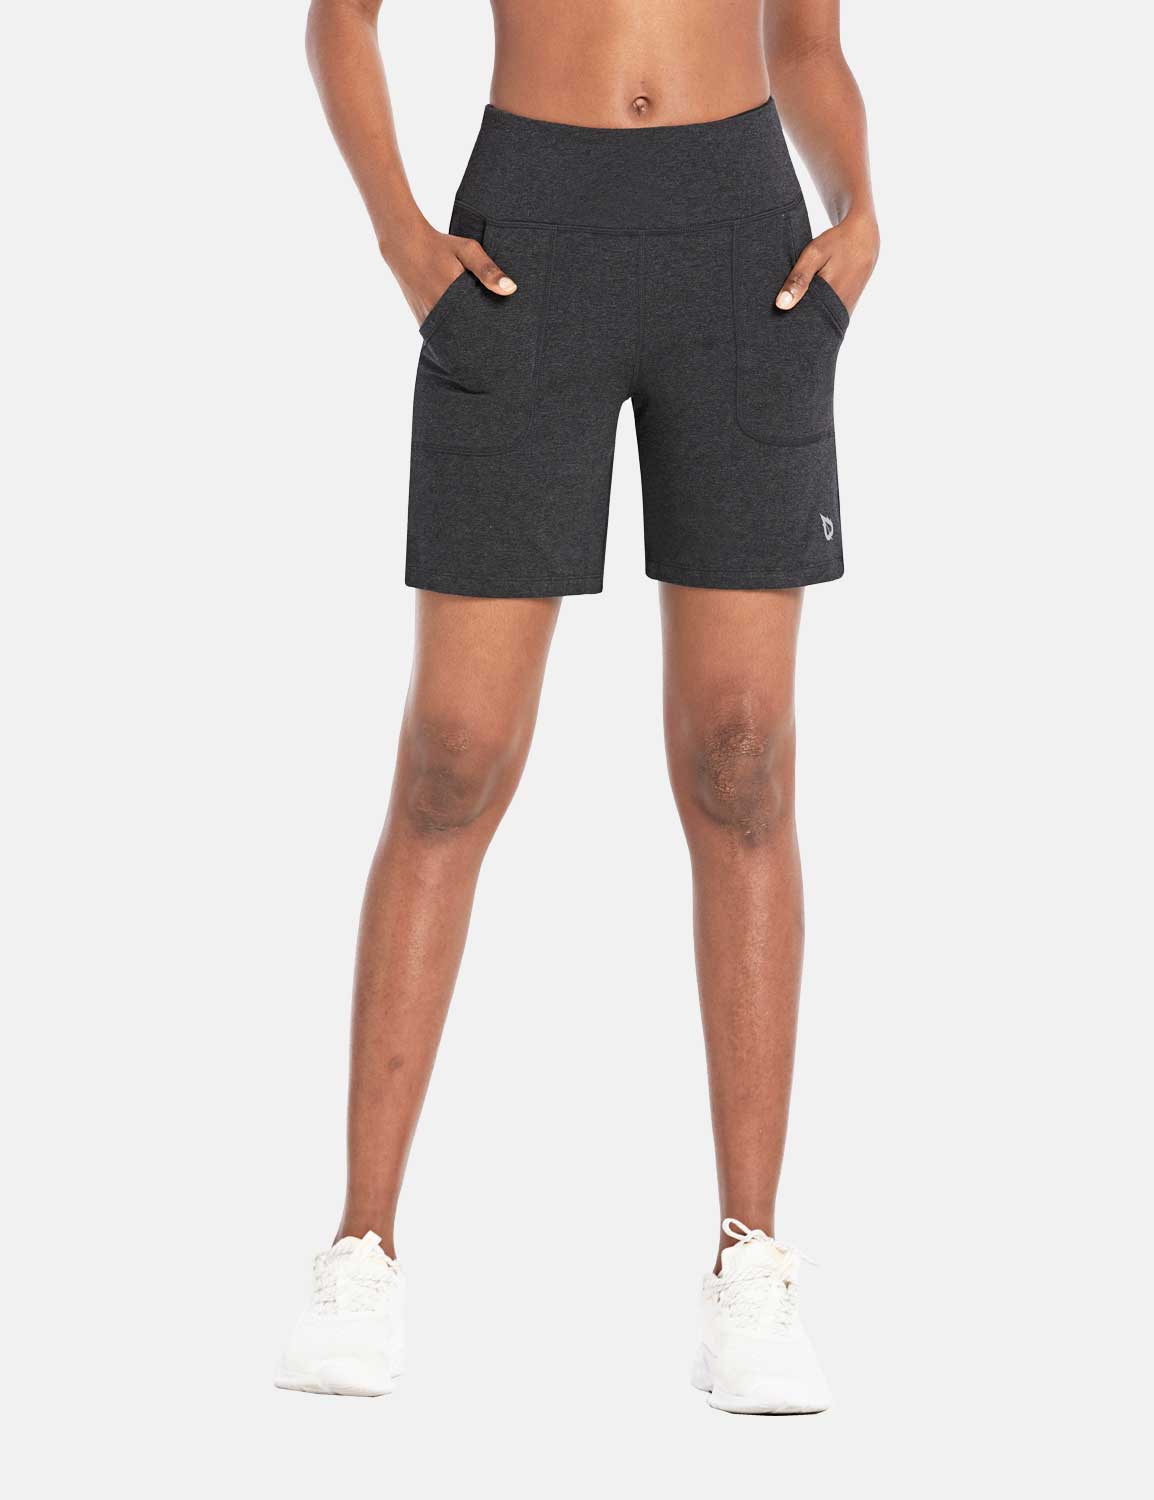 Baleaf Women's High Rise Athletic Relaxed Fit Pocketed Shorts Dark Gray Main